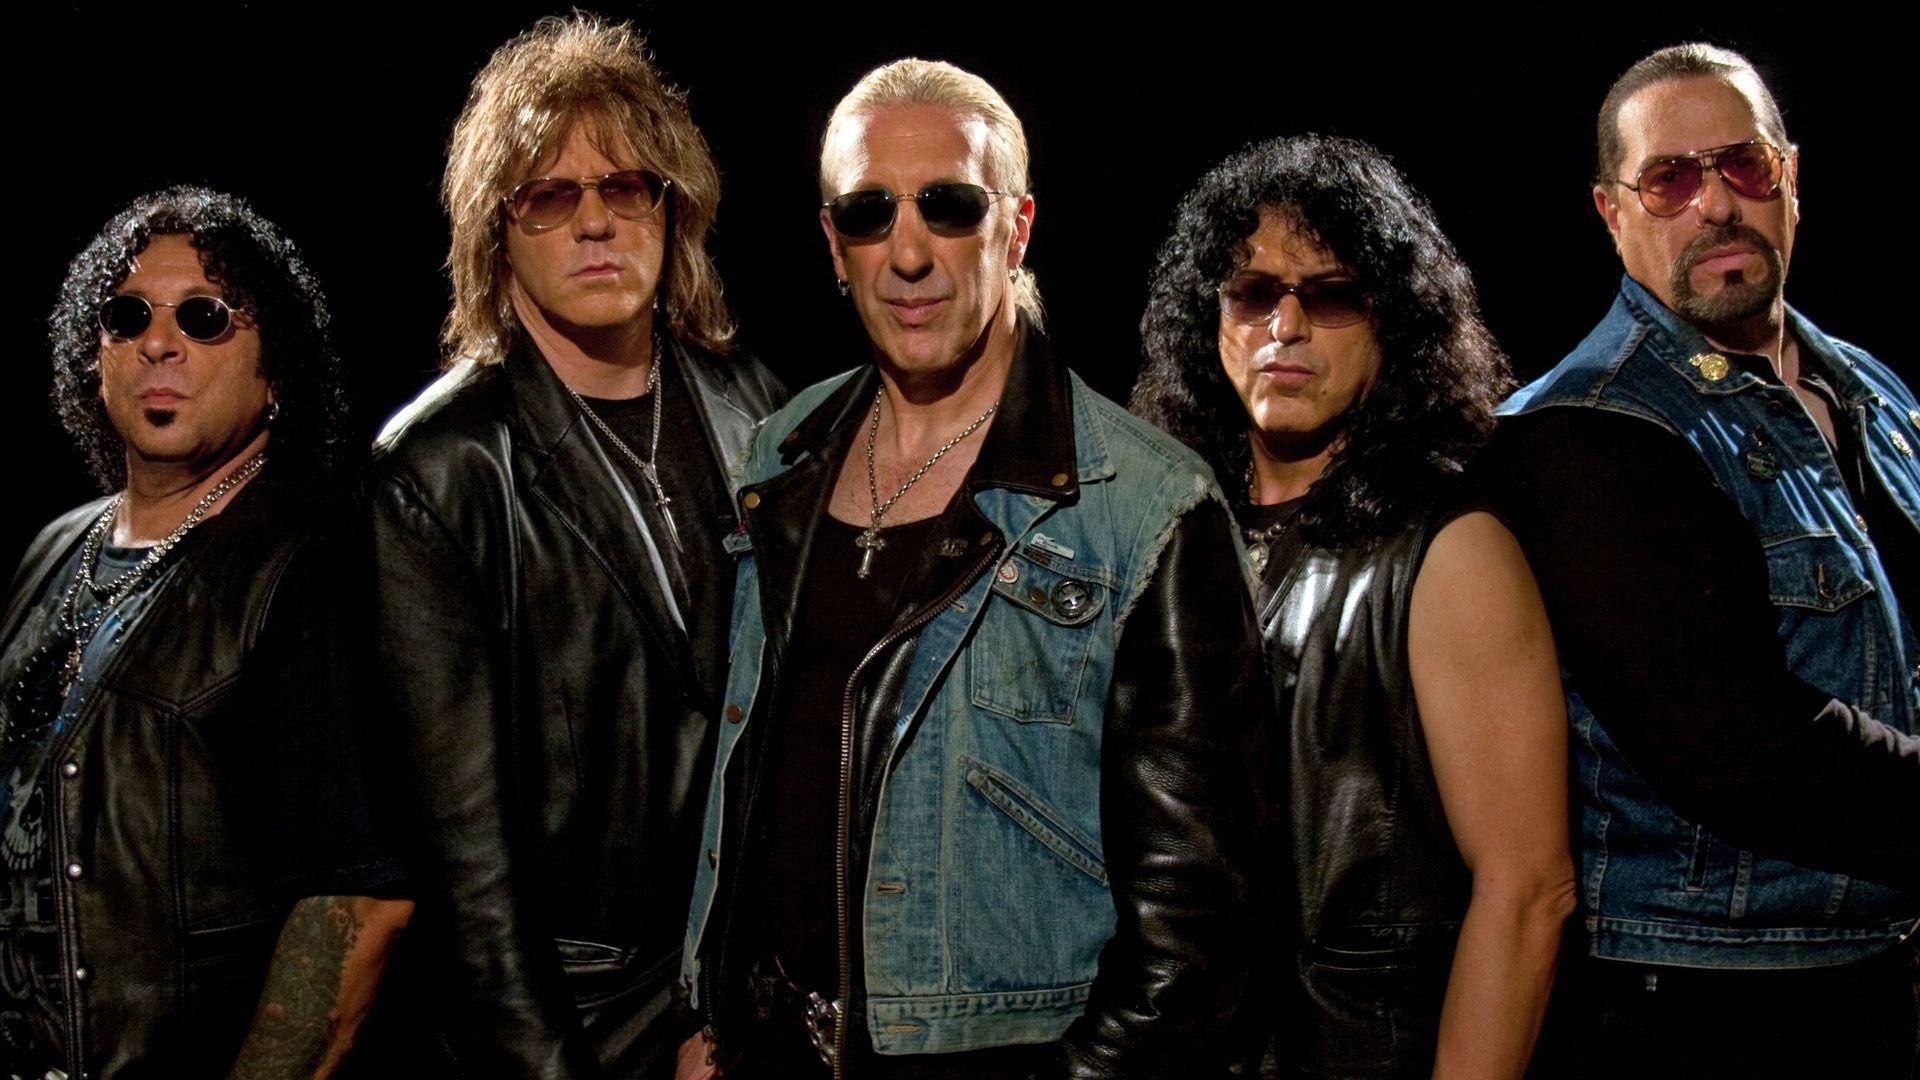 Jay Jay French, Twisted Sister, Iconic rock band, 1920x1080 Full HD Desktop